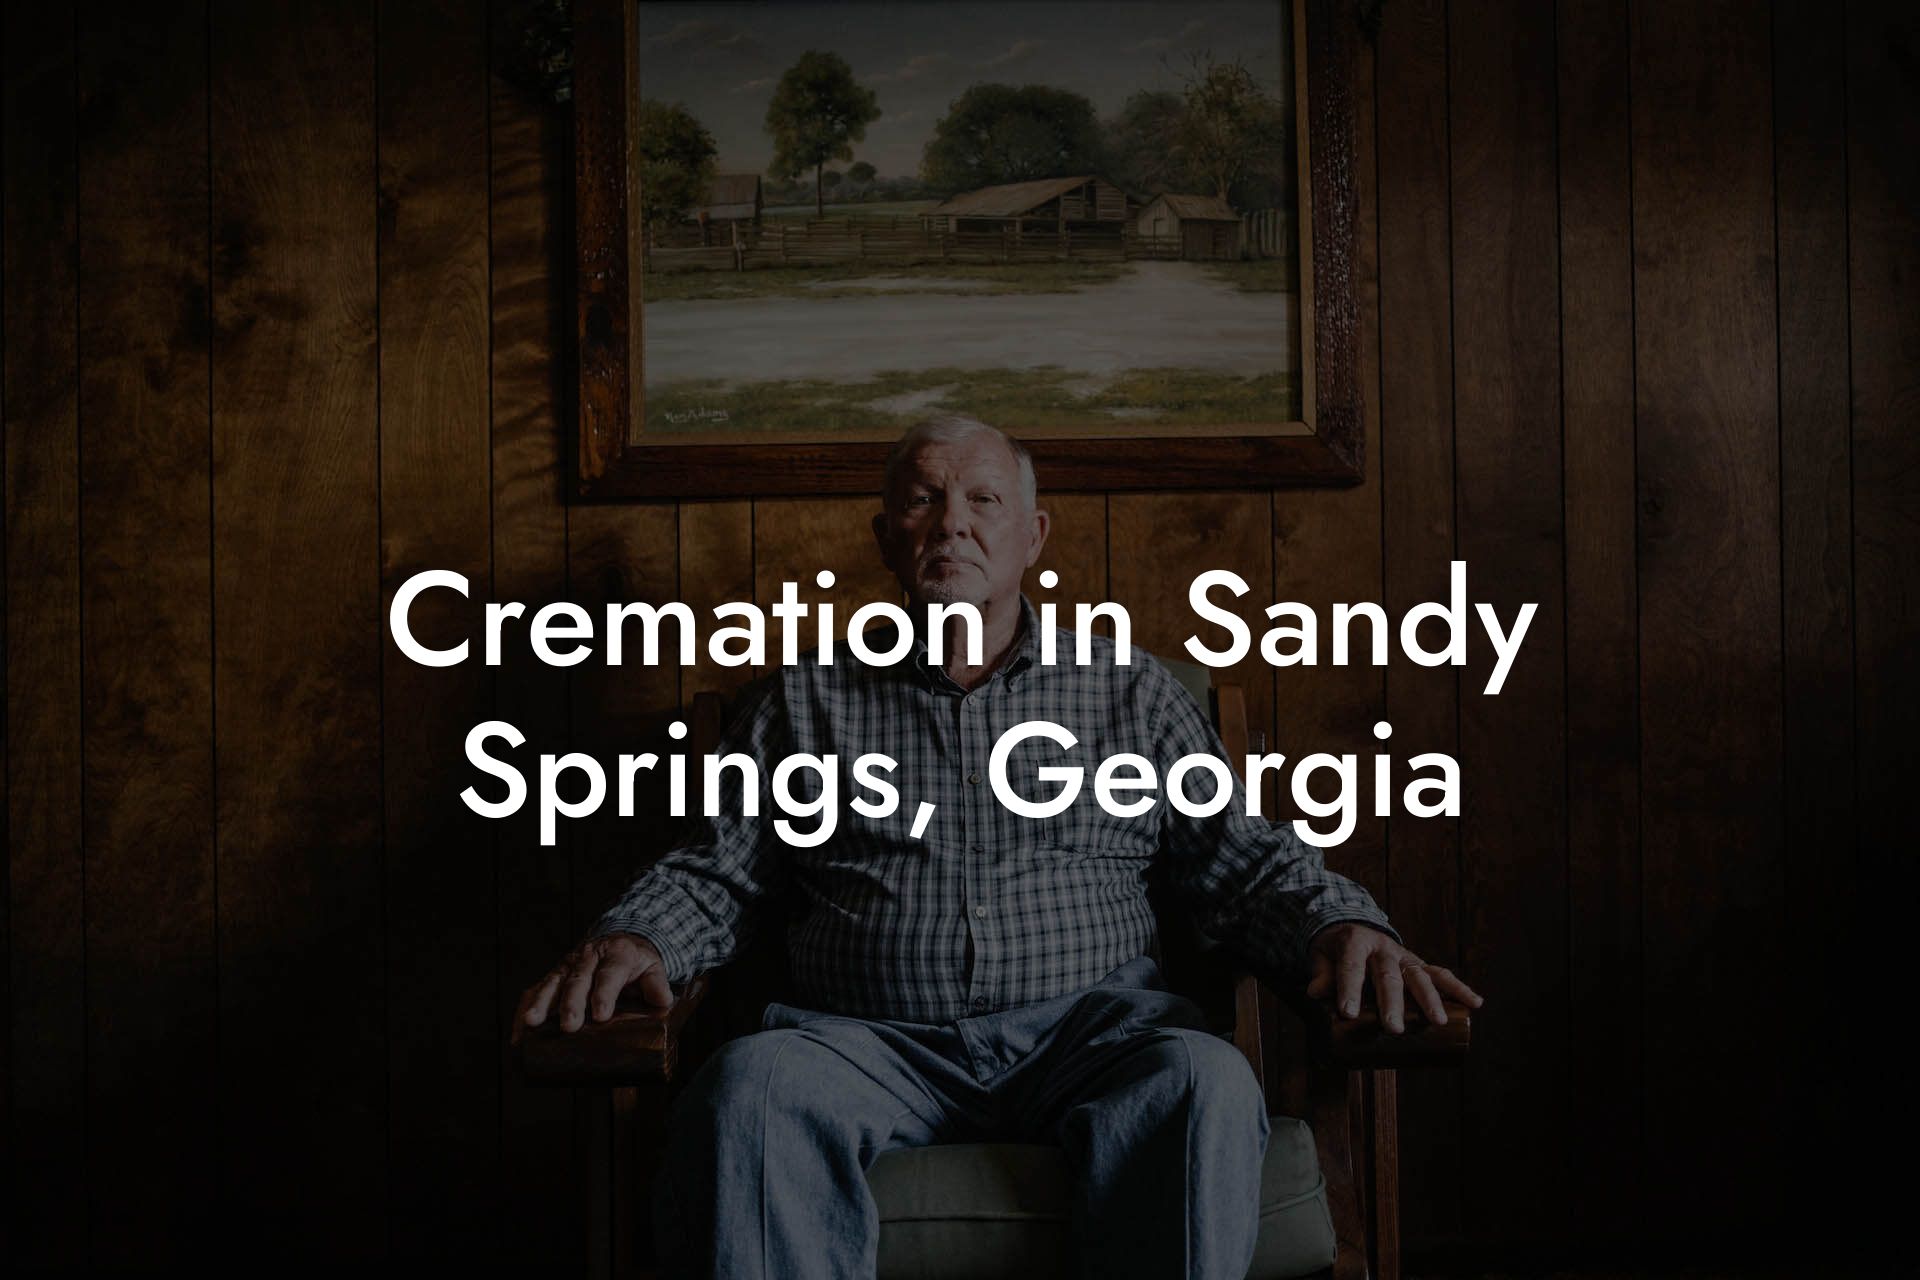 Cremation in Sandy Springs, Georgia